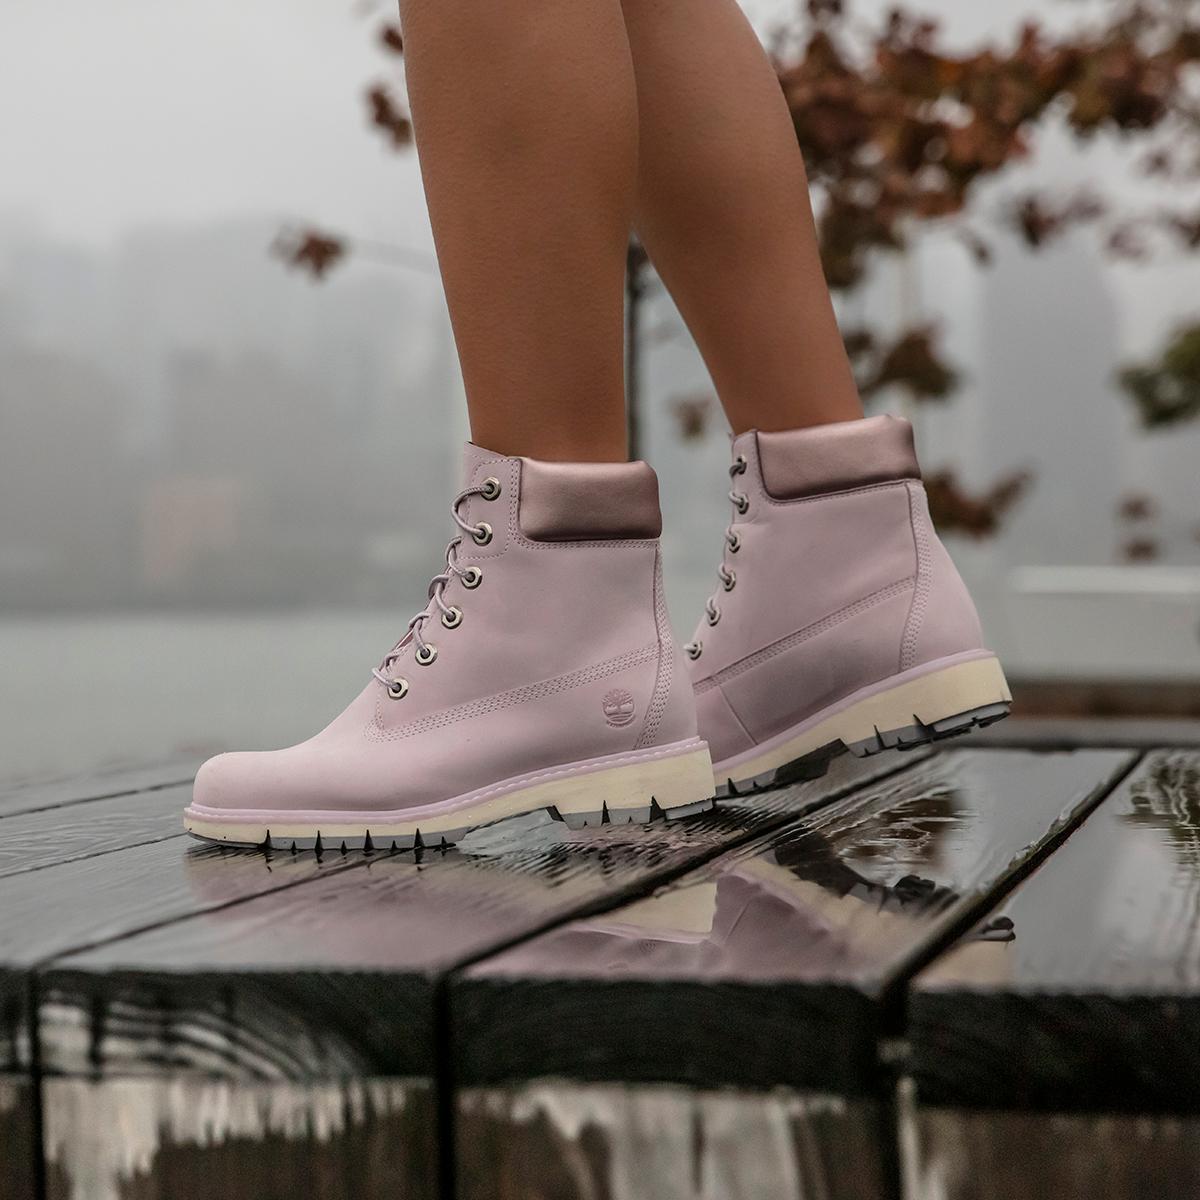 resterend erger maken suspensie Timberland on Twitter: "Dreaming about spring weather? These are your  boots. A colorful and lightweight spin on the Classic. Introducing the Lucia  Way Collection. #Timberland https://t.co/fZMhN7dMcO" / X